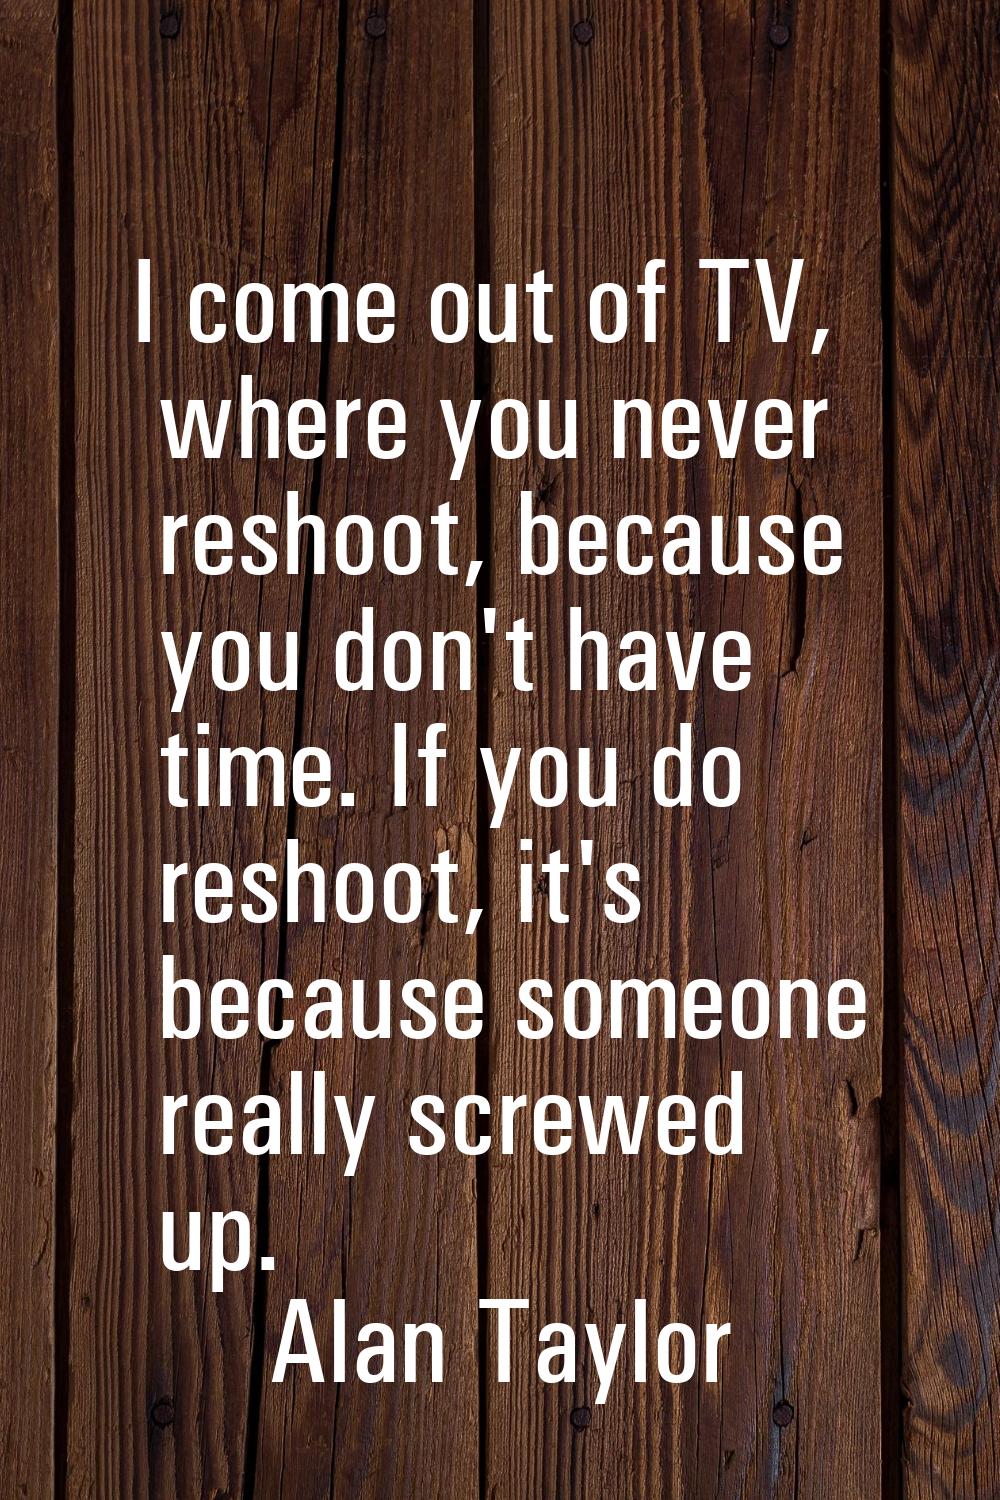 I come out of TV, where you never reshoot, because you don't have time. If you do reshoot, it's bec